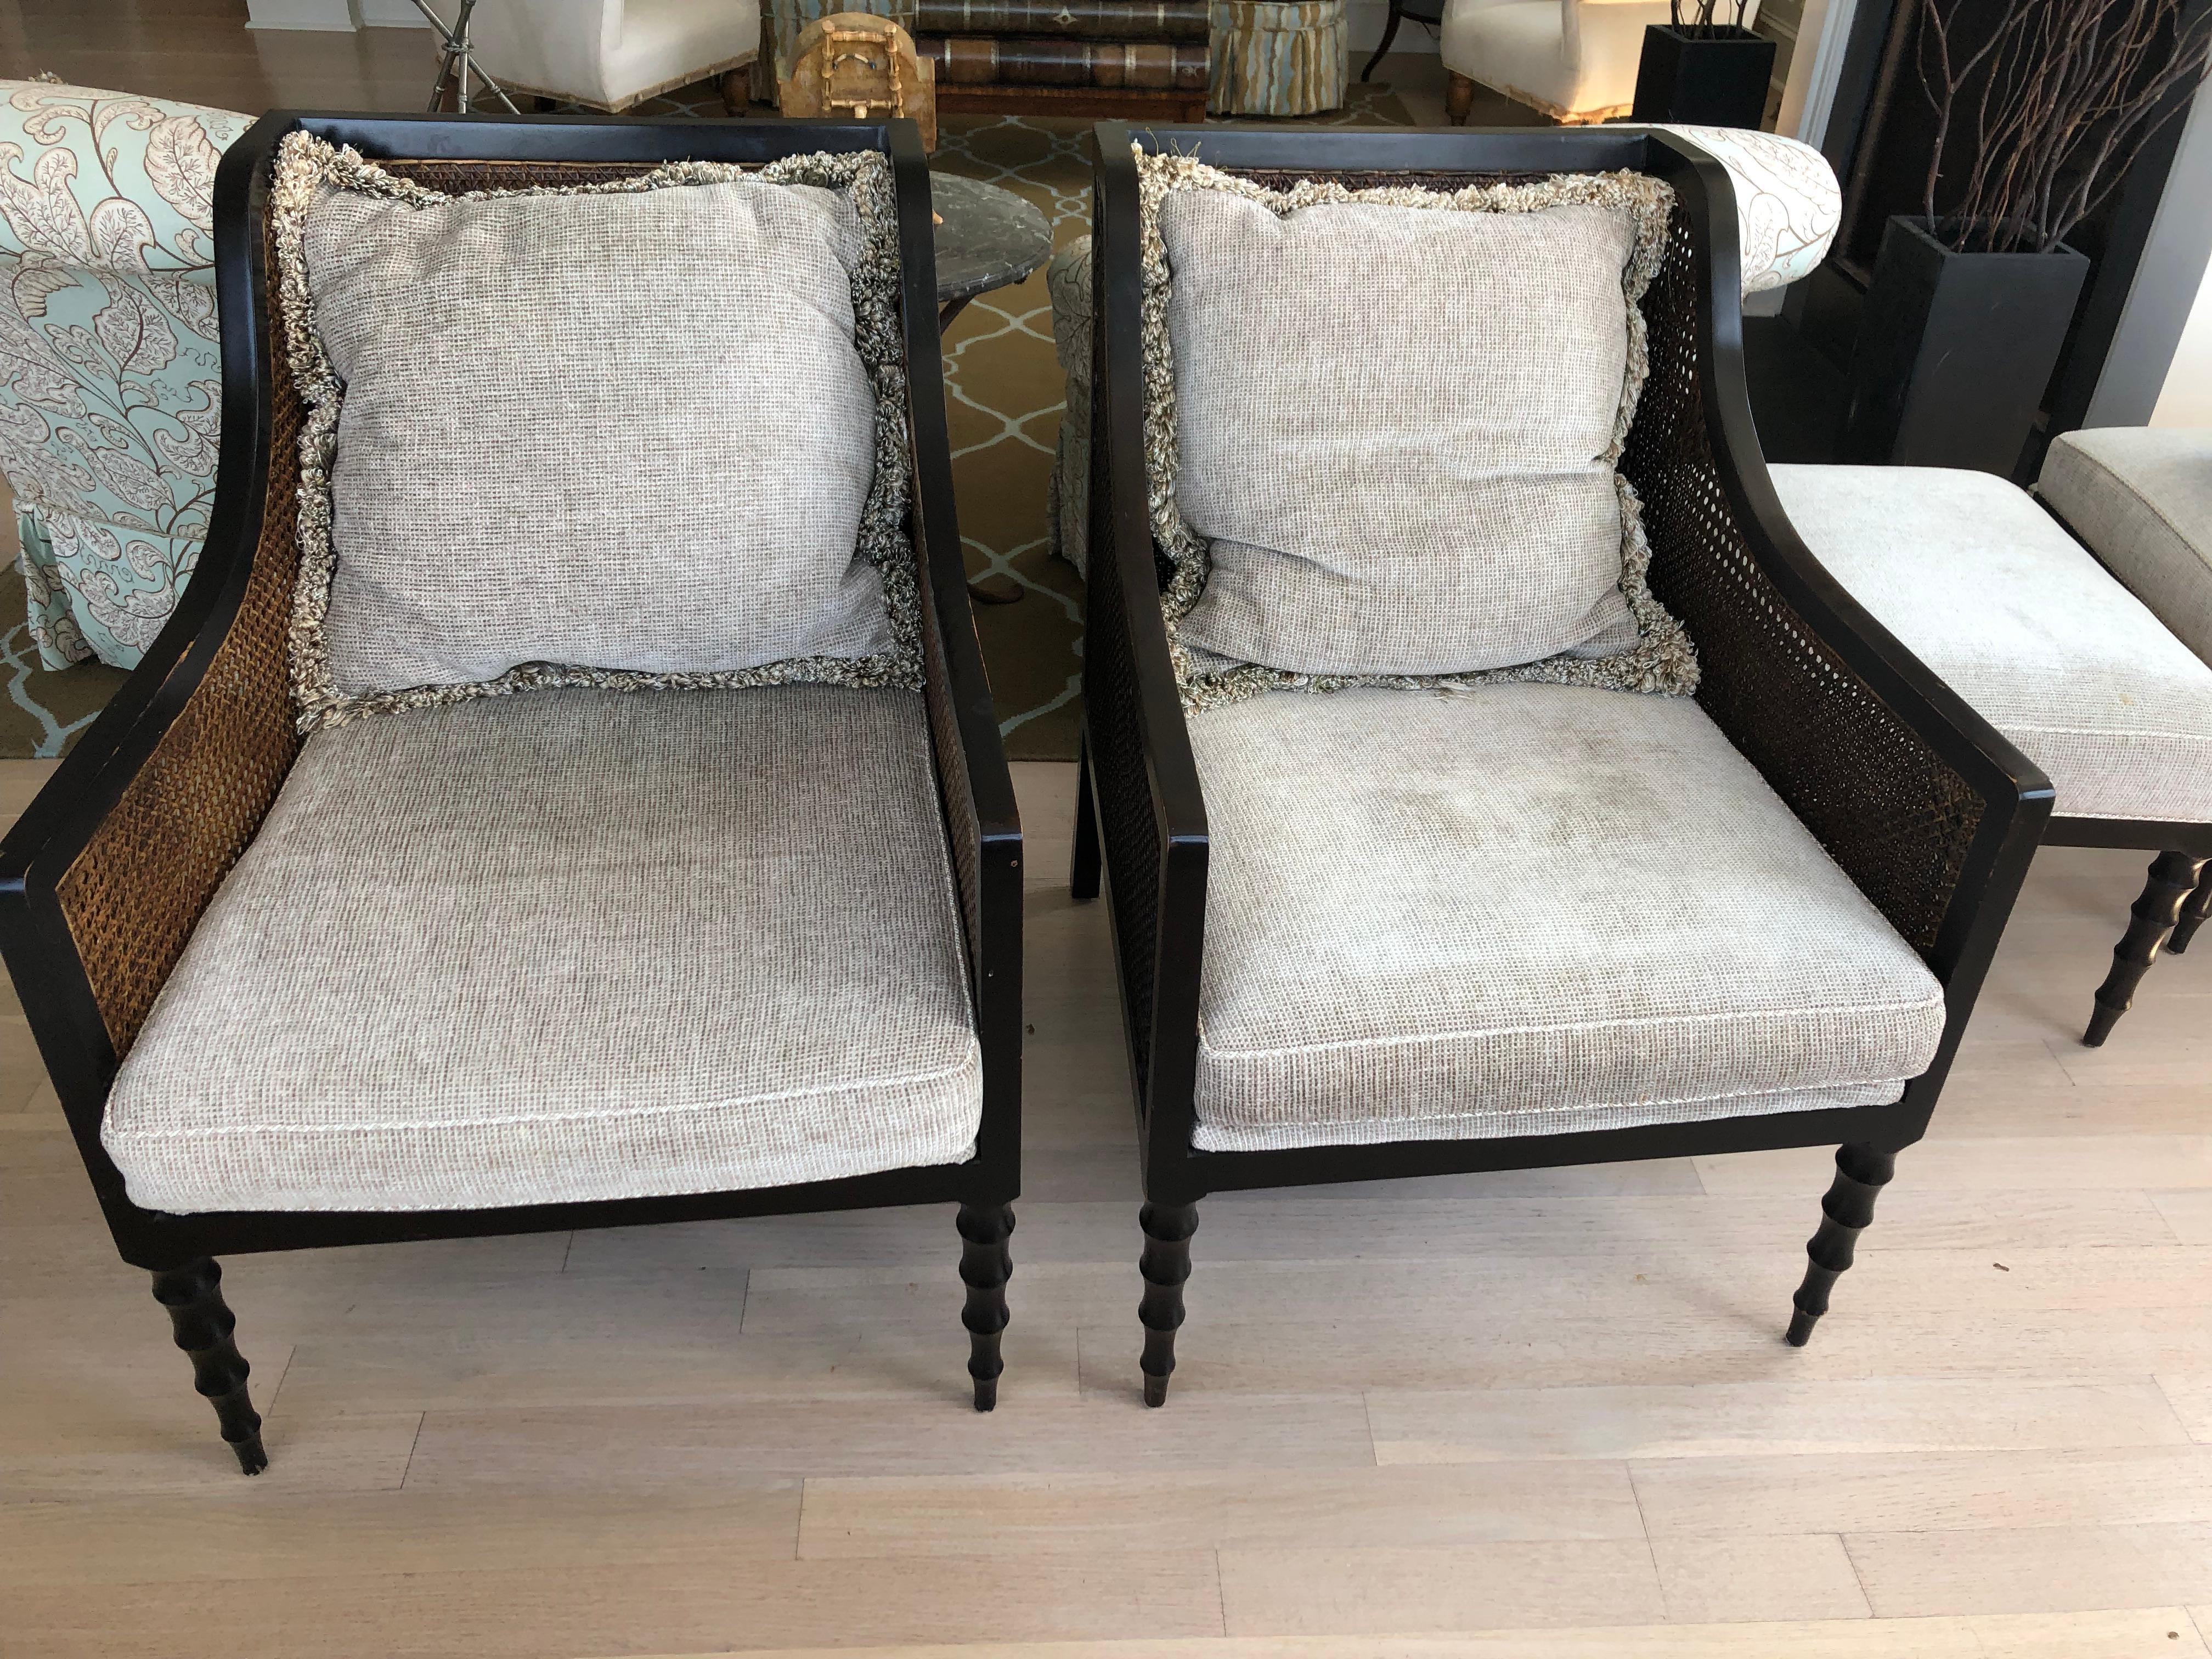 Stylish and refined Indonesian pair of ebonized and natural colored double caned club chairs having beige chenille removeable seat and back cushions and turned carved legs. There are a set of matching rectangular ottomans included, 25.5 W 19 D 17.5